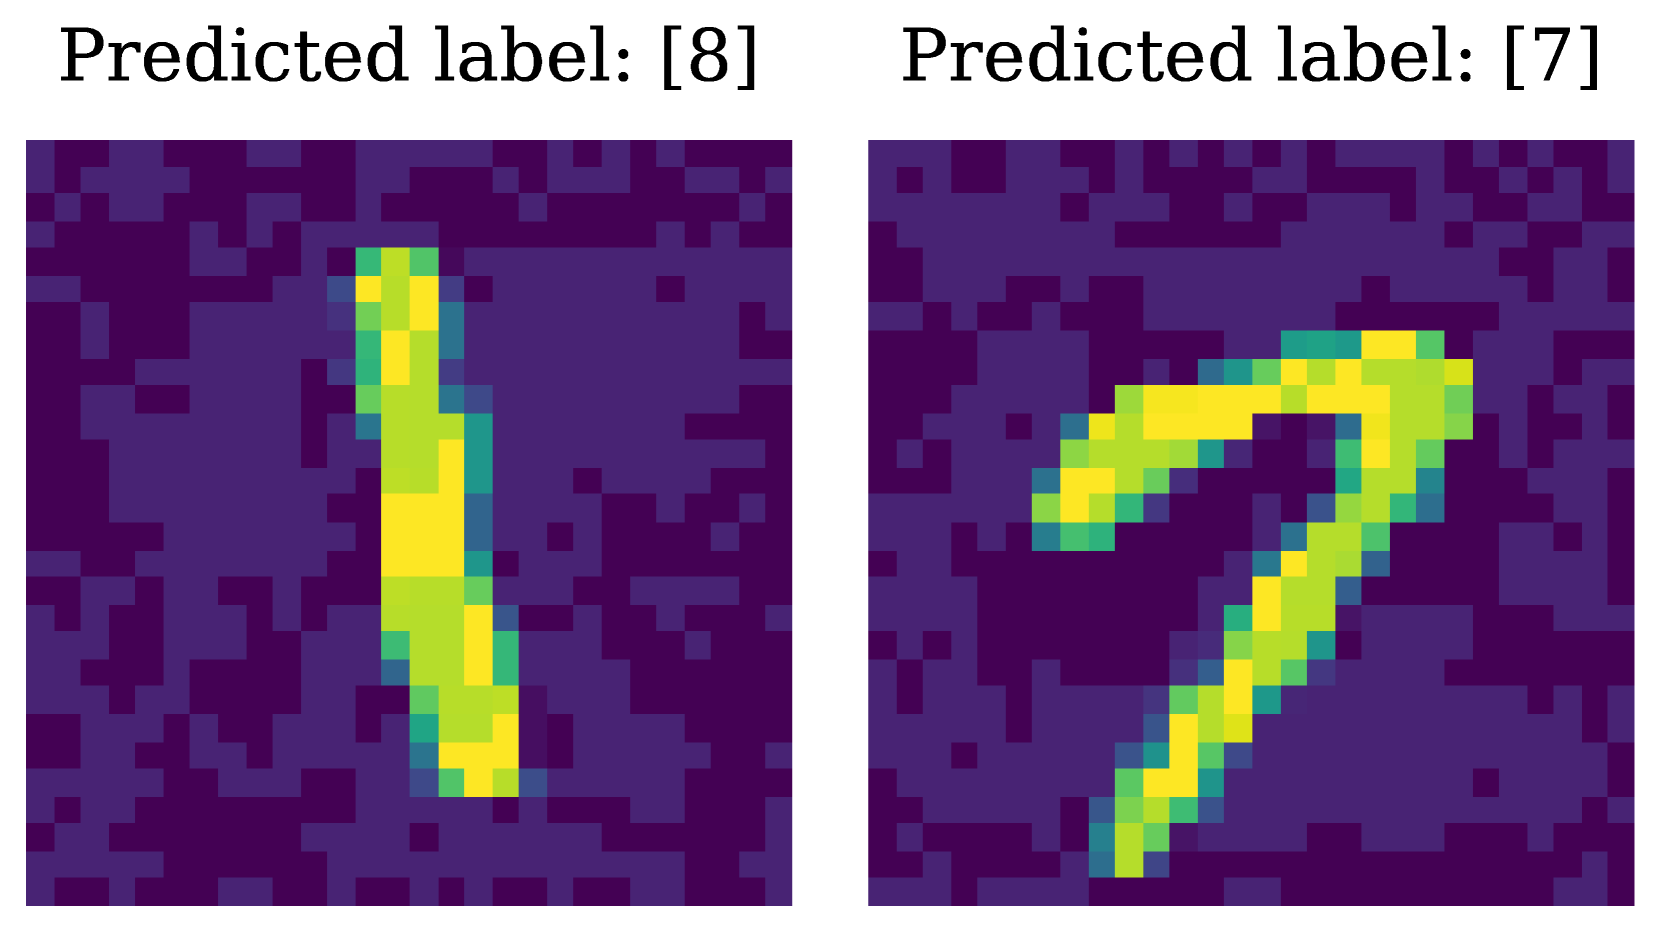 Watermarking Neuromorphic Brains: Intellectual Property Protection in Spiking Neural Networks